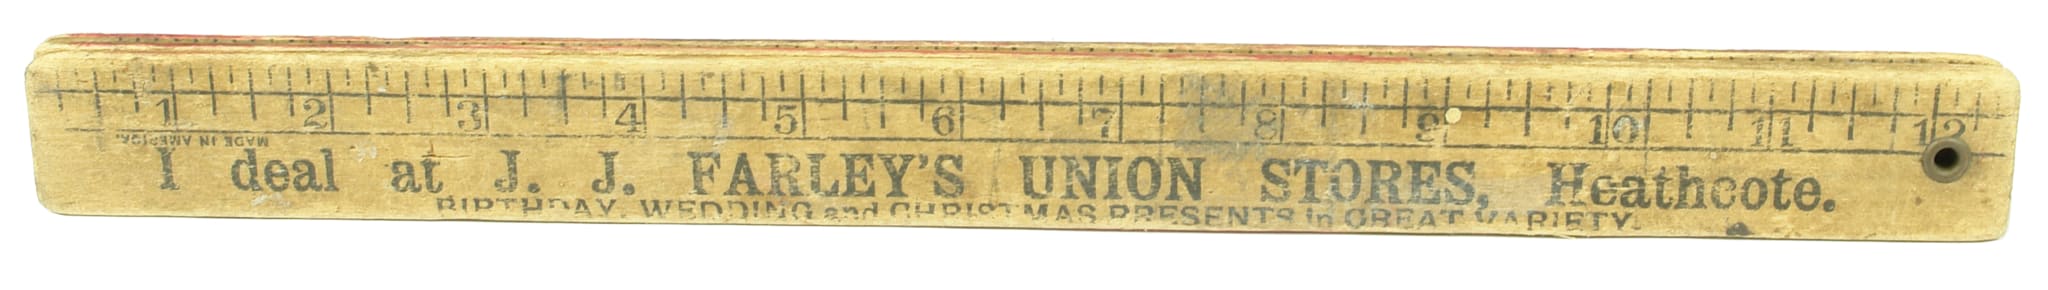 Farley's Union Stores Heathcote Advertising Ruler